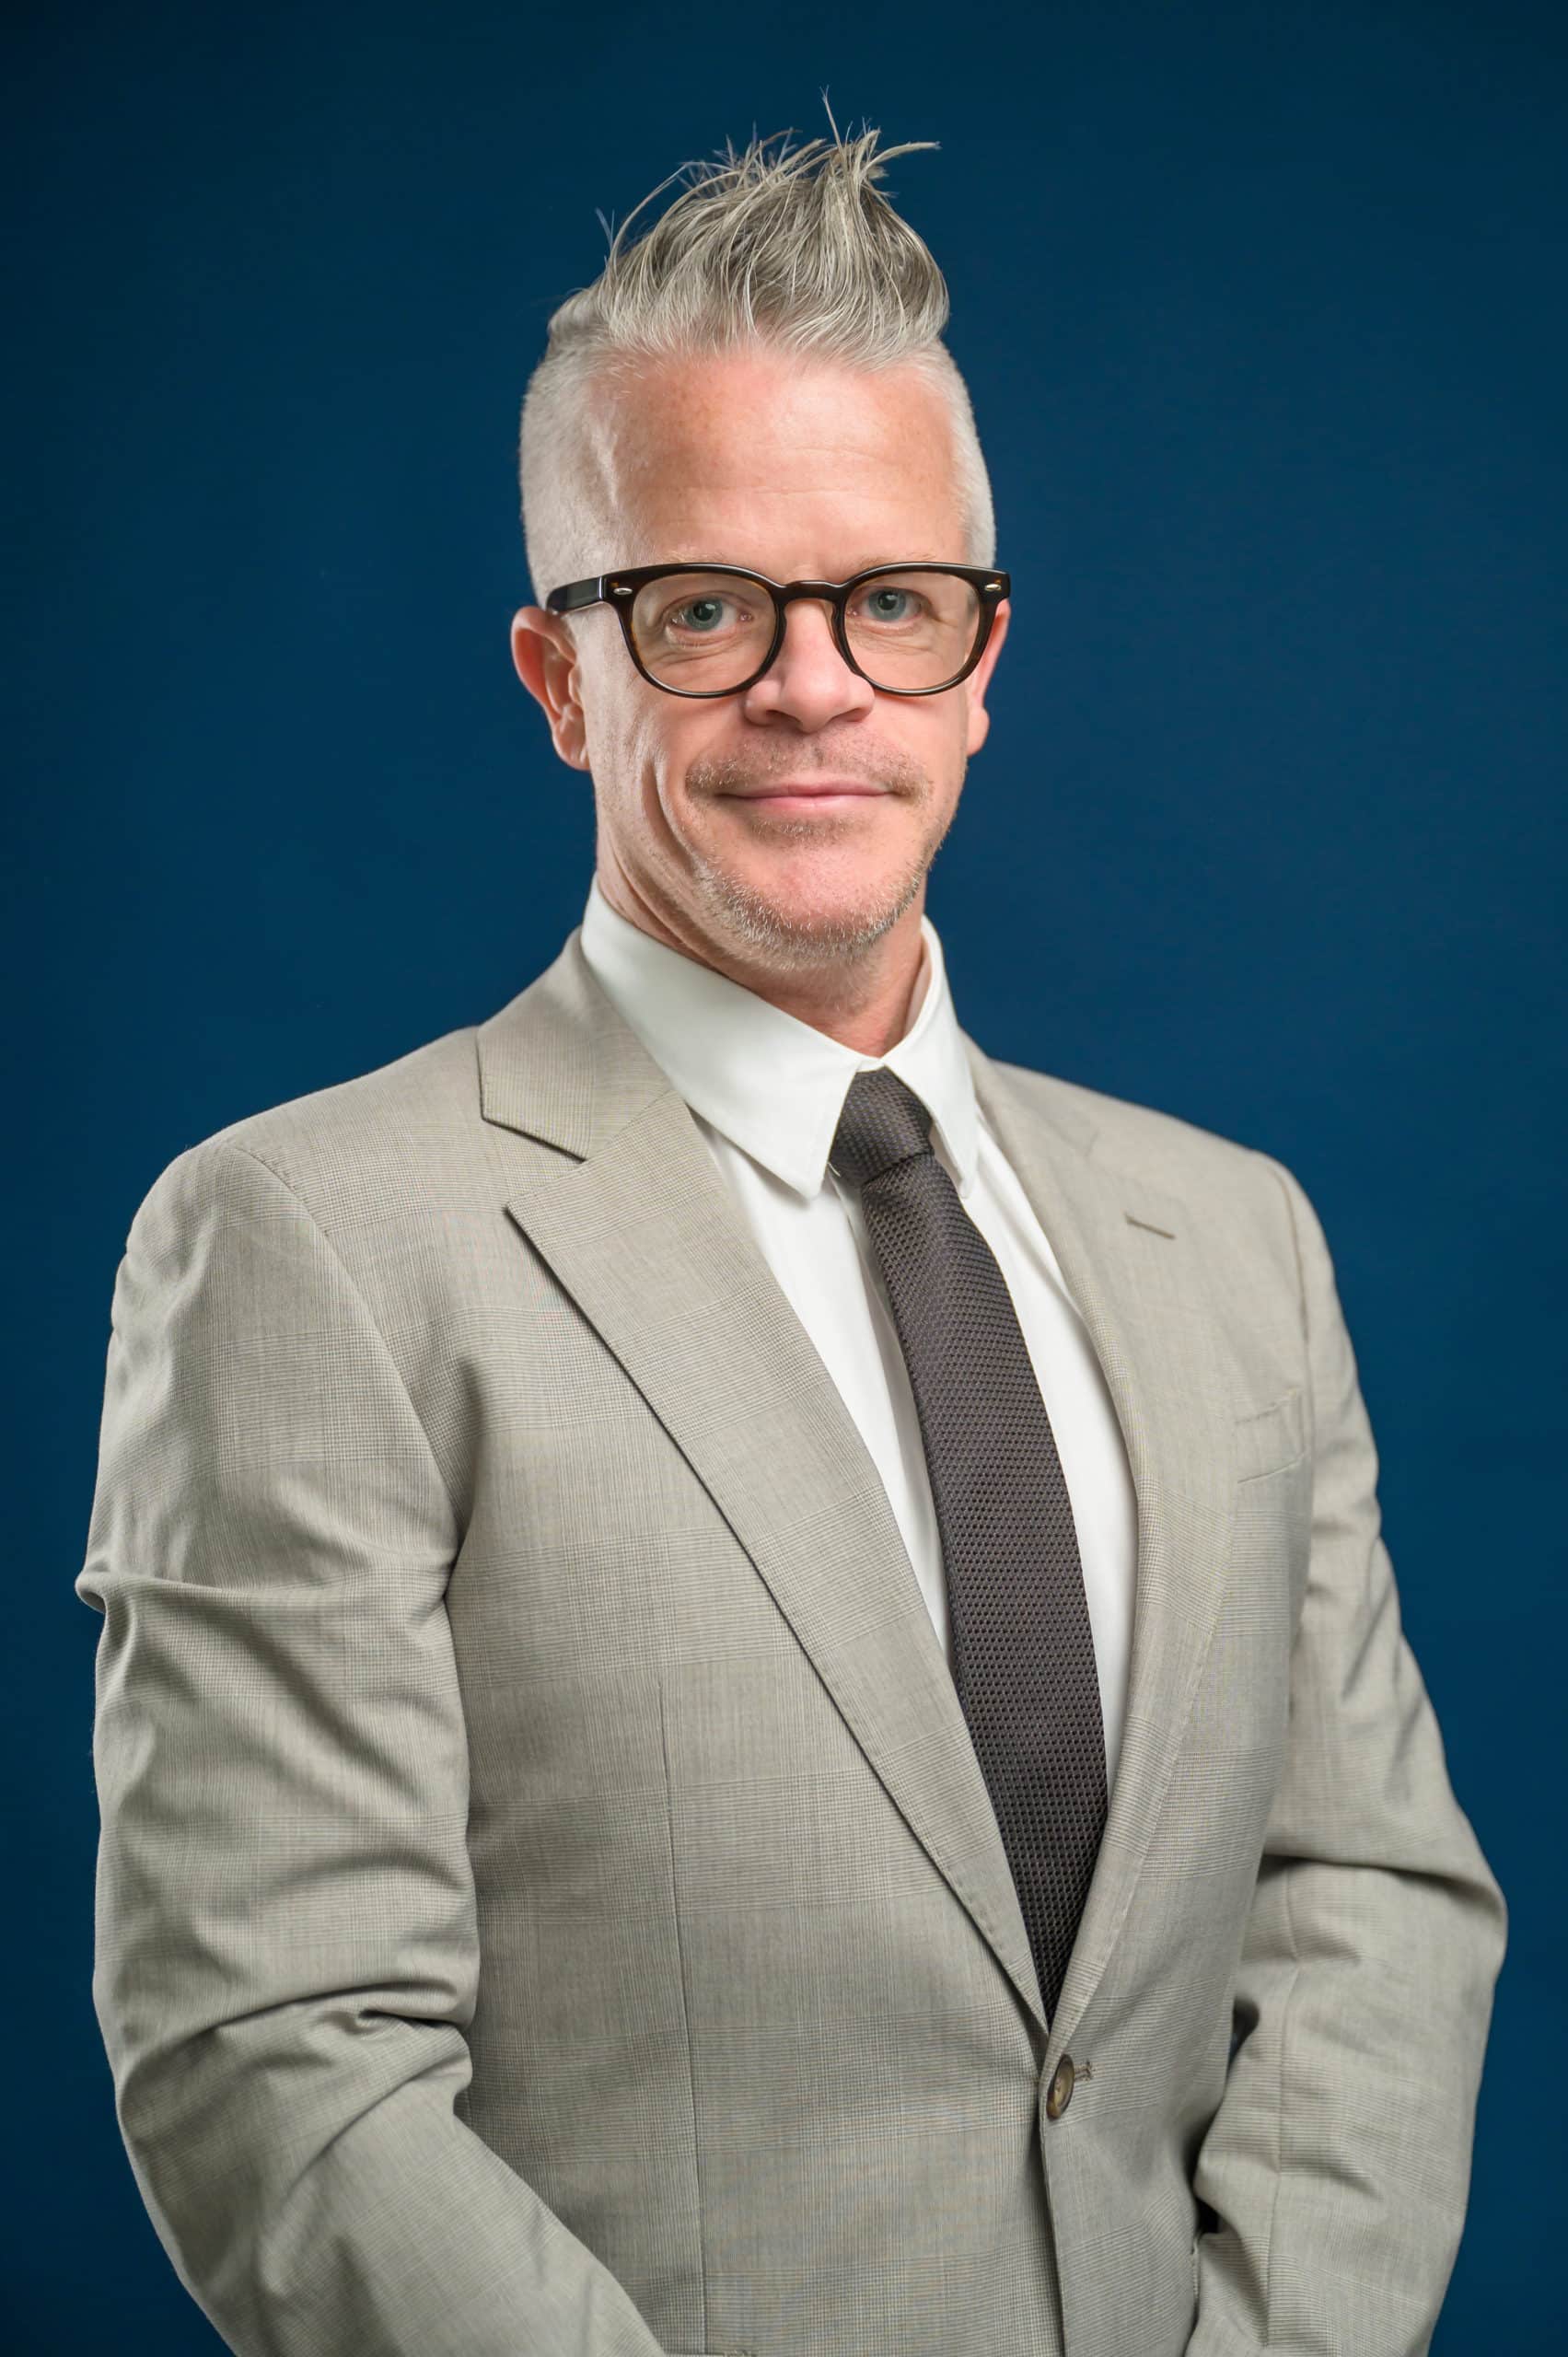 Professional headshot of a man wearing a tan suit wearing glasses in front of a blue backdrop